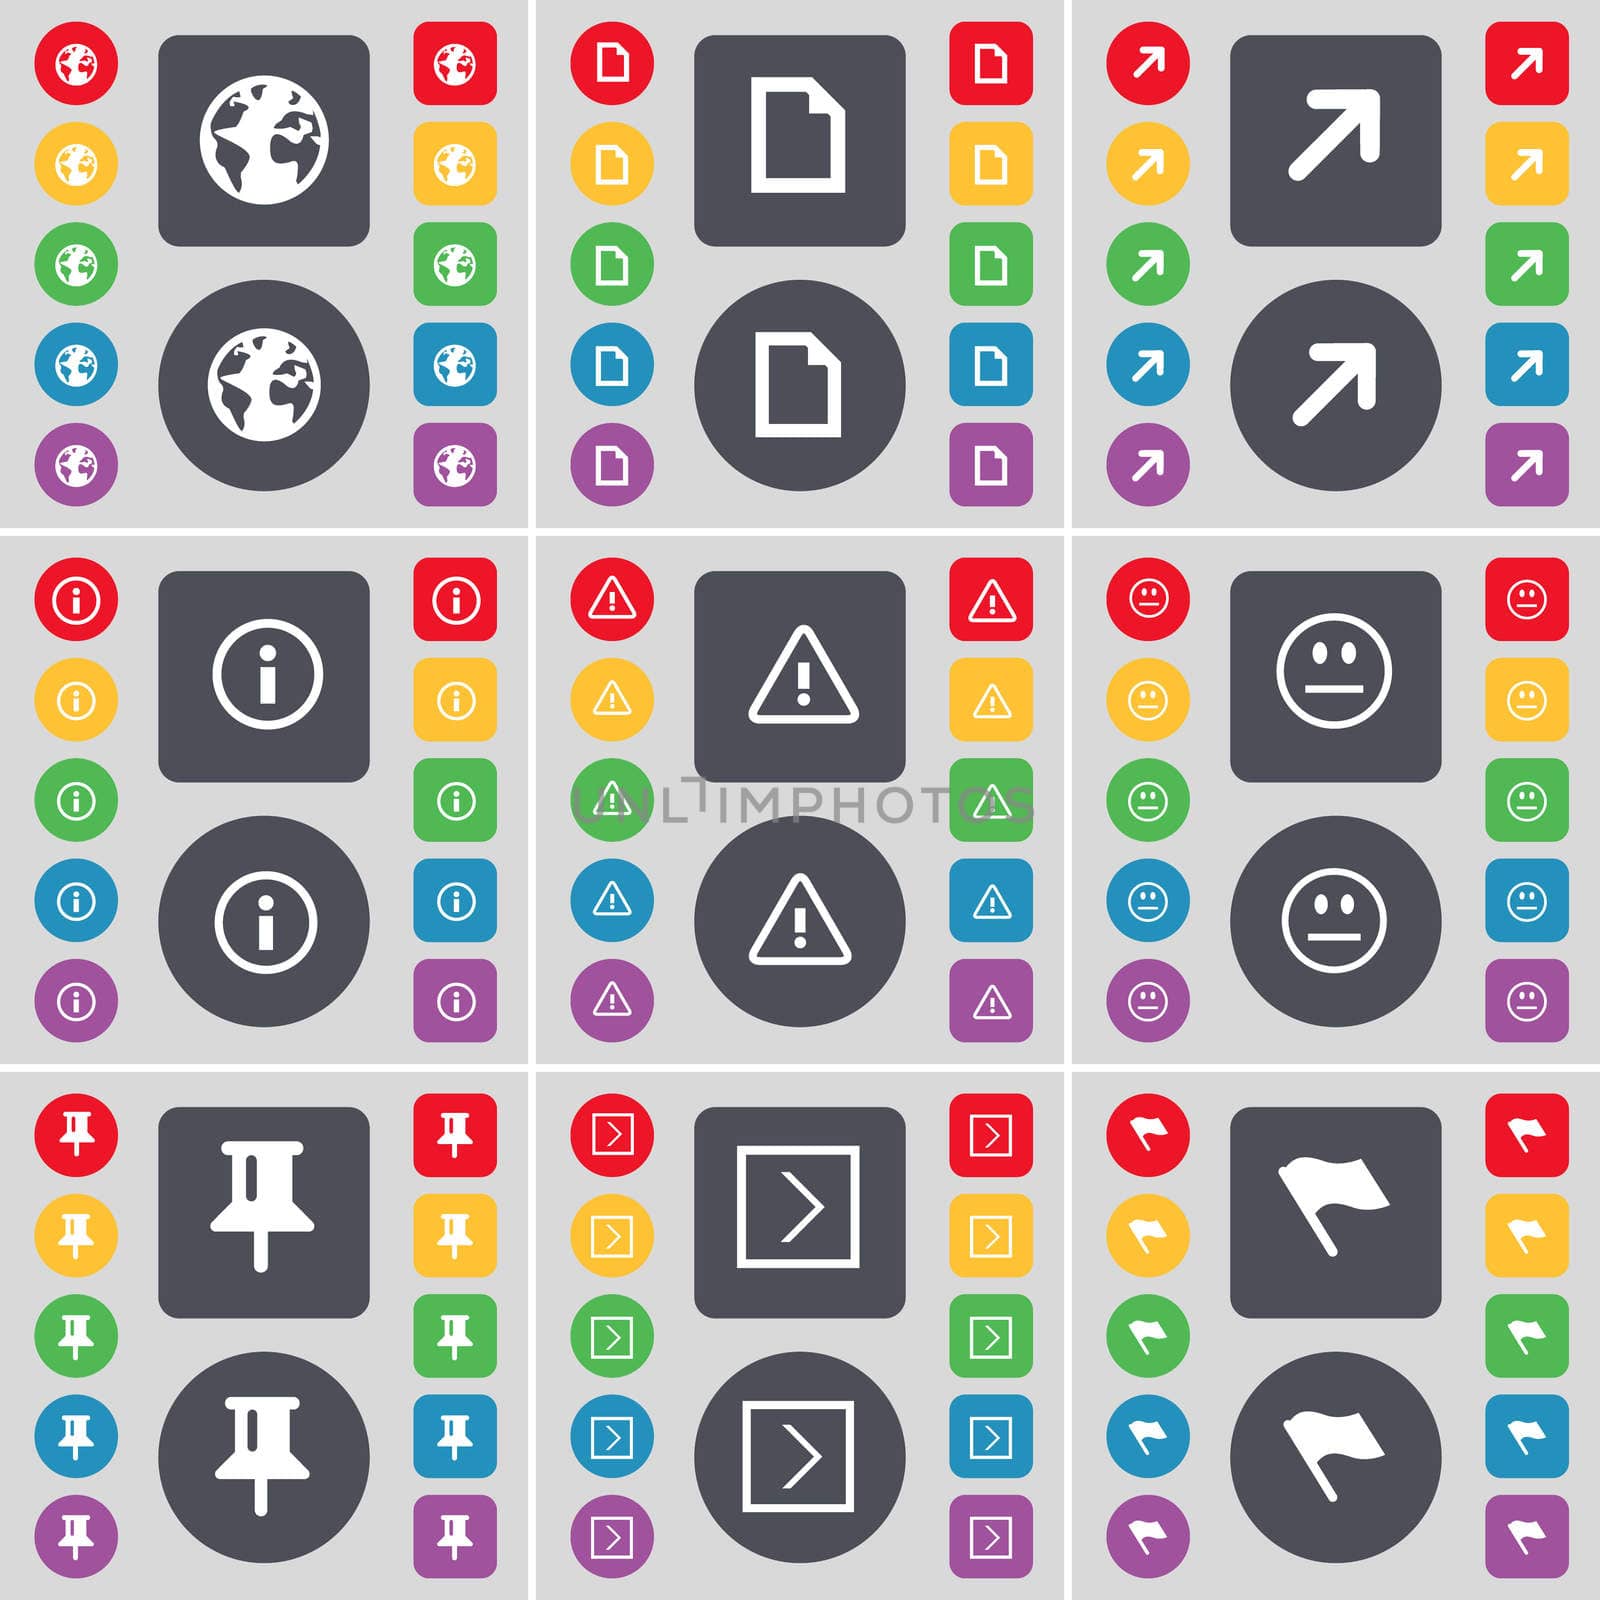 Earth, File, Full screen, Information, Warning, Smile, Pin, Arro icon symbol. A large set of flat, colored buttons for your design.  by serhii_lohvyniuk